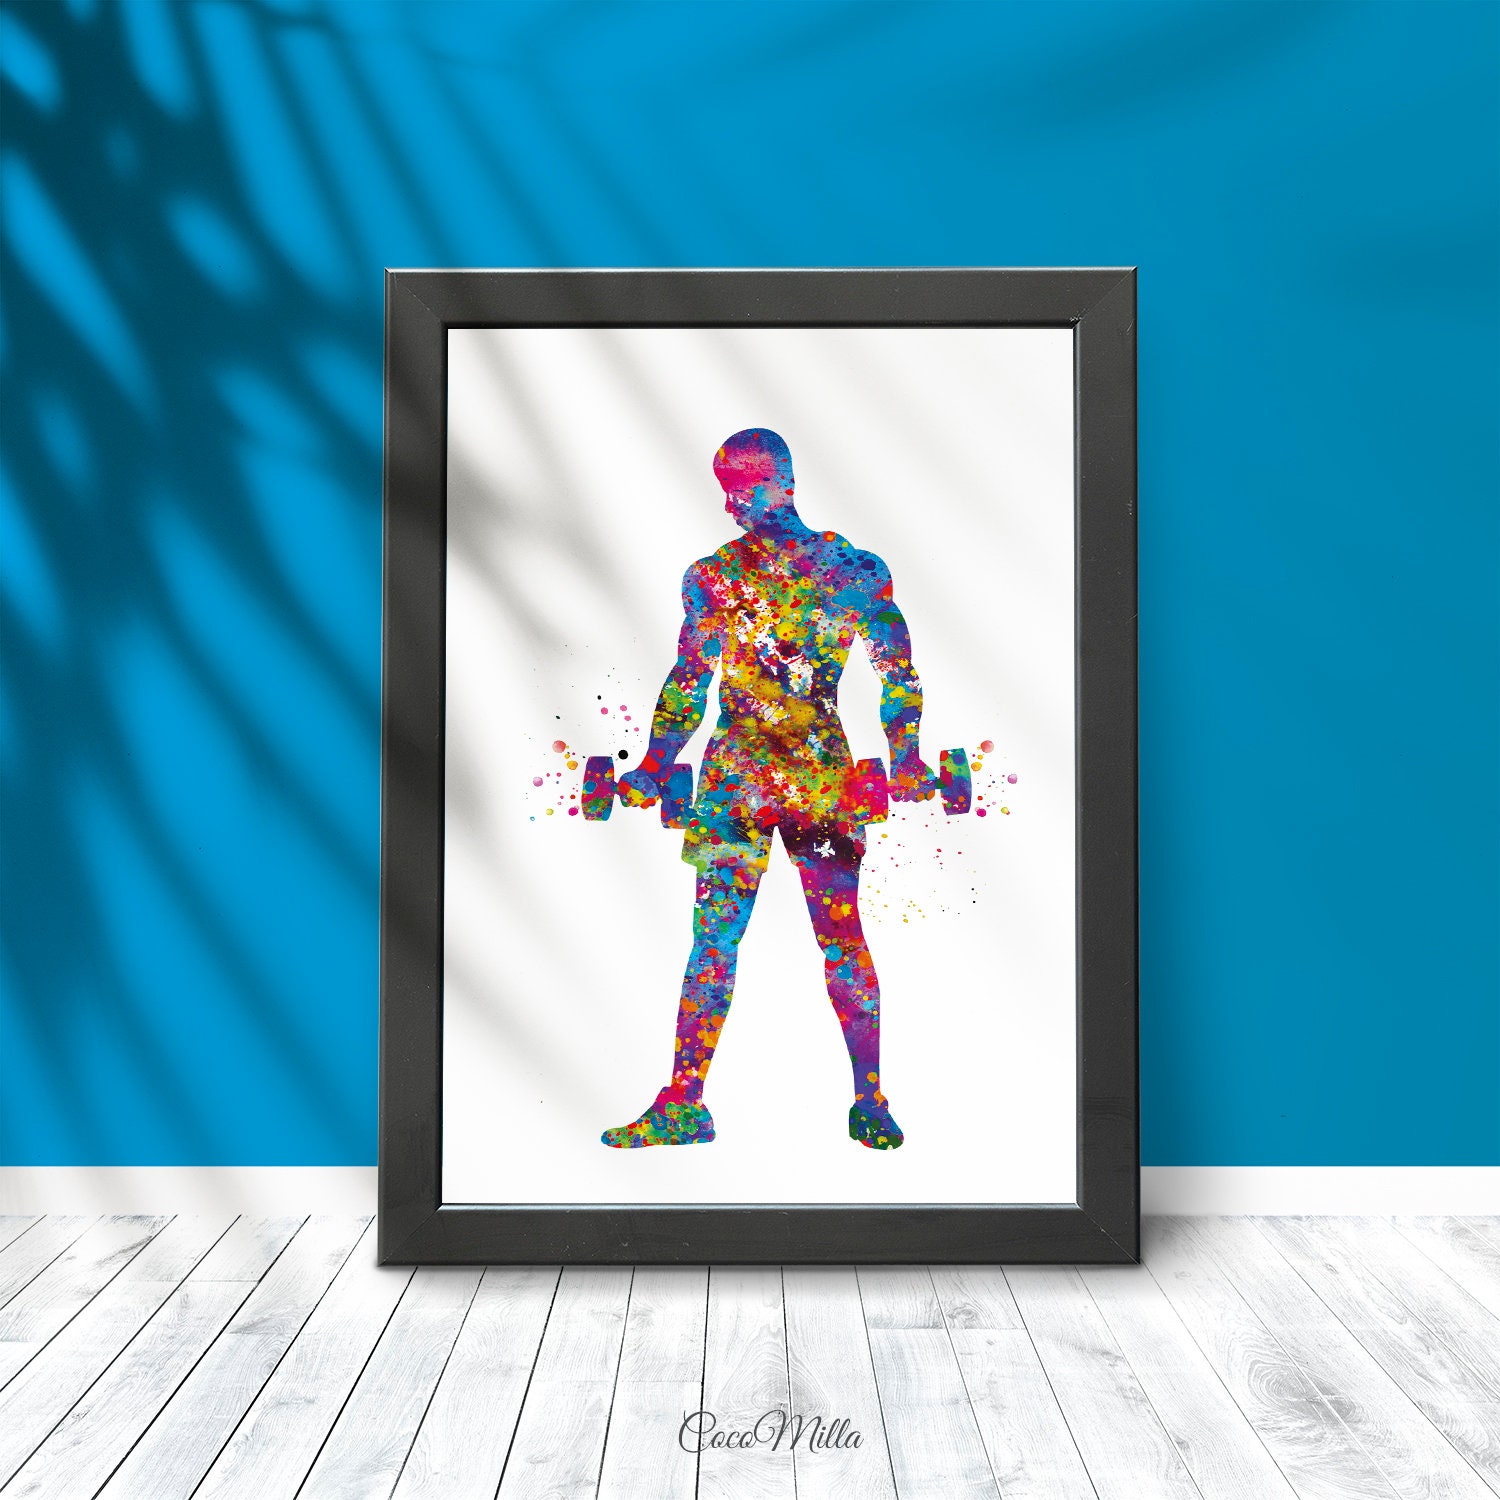  Sport Birthday Decorations,Treadmill Man Workout Print,Fitness  Gifts For Men,Gym Art Printable,Exercise Room Decor,Watercolor Sport Art  Print,Boy Sports Room Decor,8x12 Inch Framed Wall Art: Posters & Prints